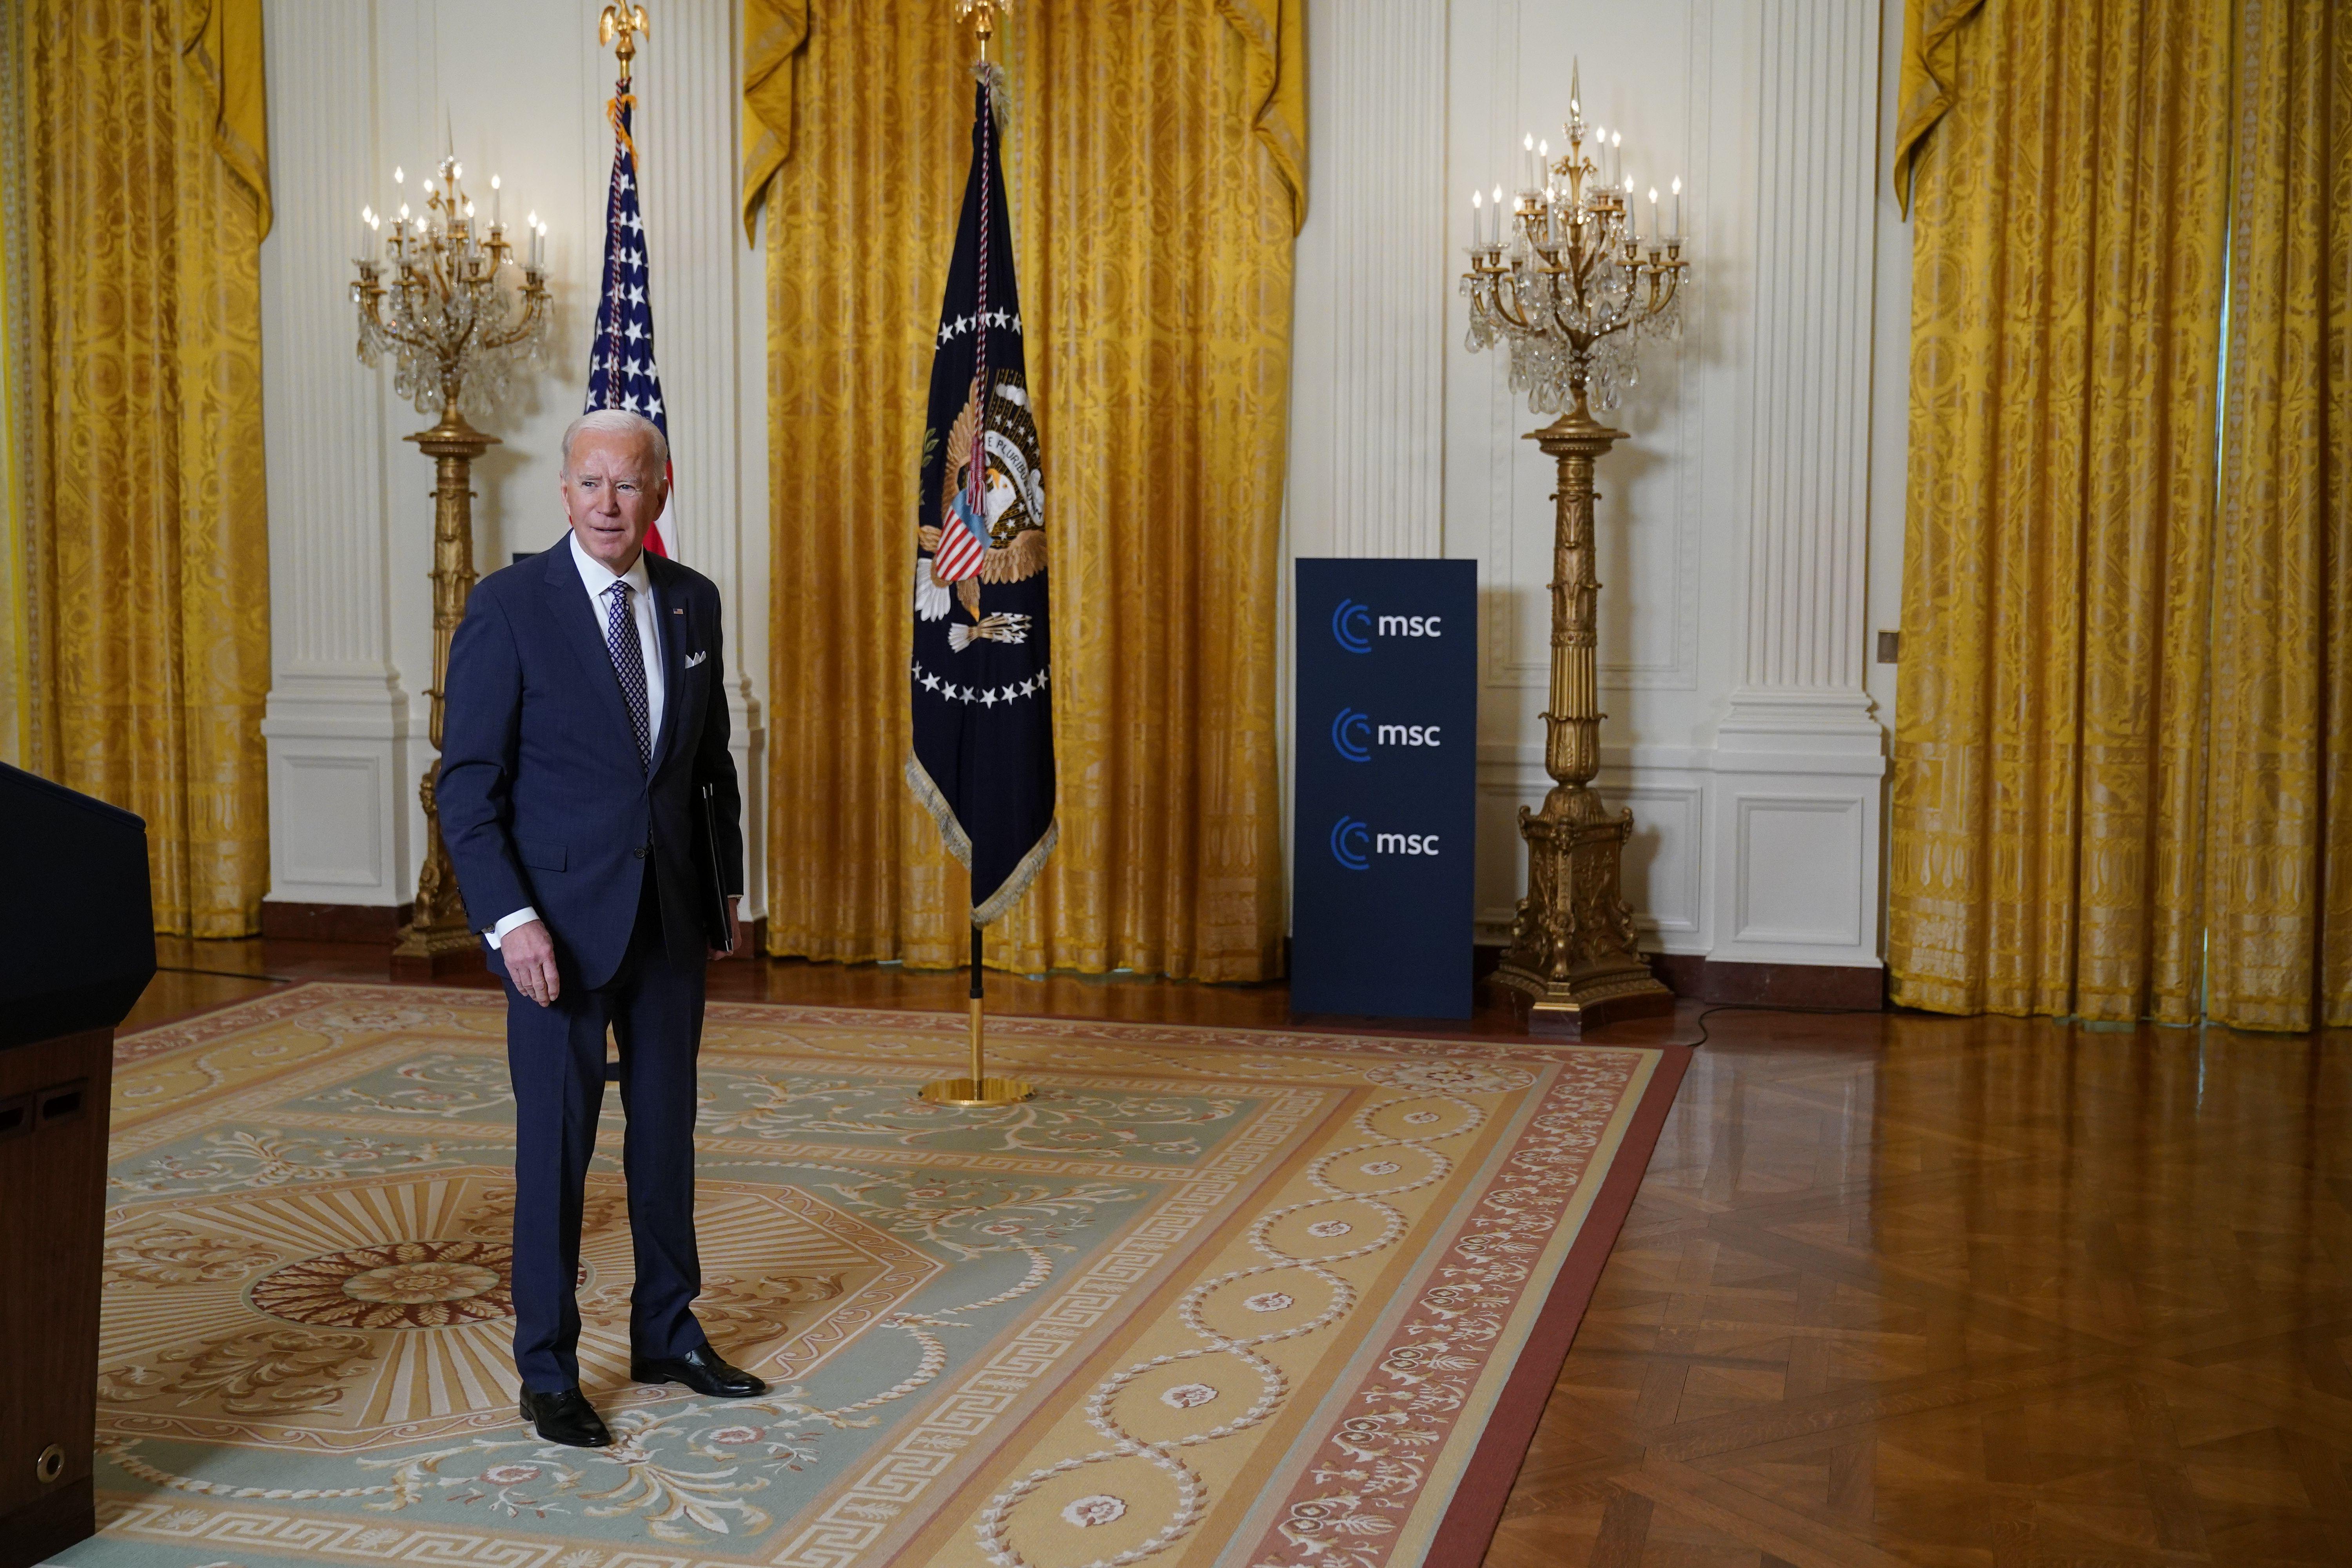 Biden stands in the East Room of the White House.